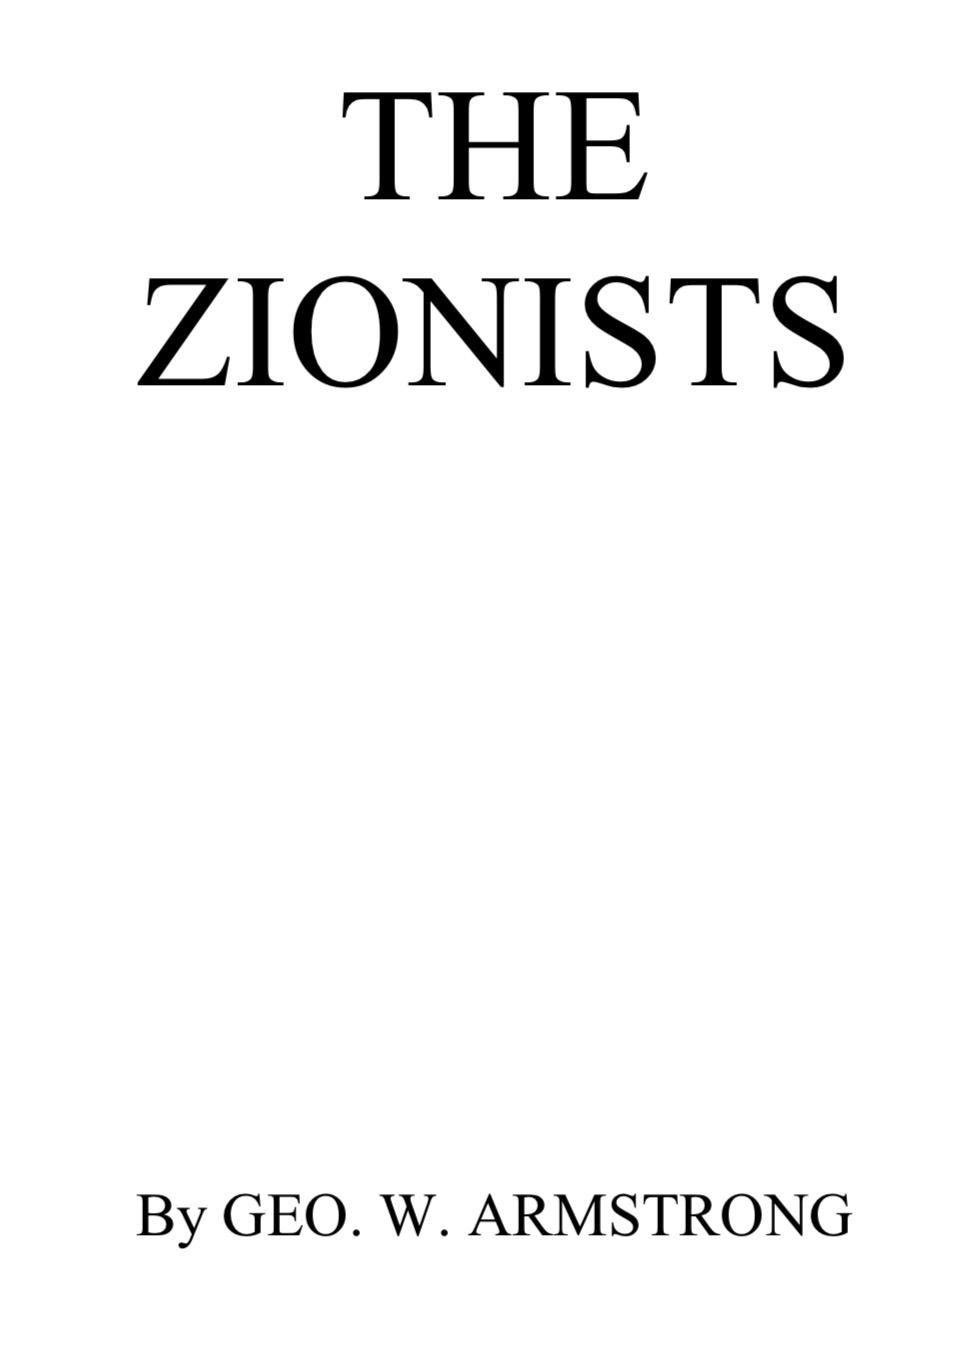 The Zionists (1950) by George W Armstrong